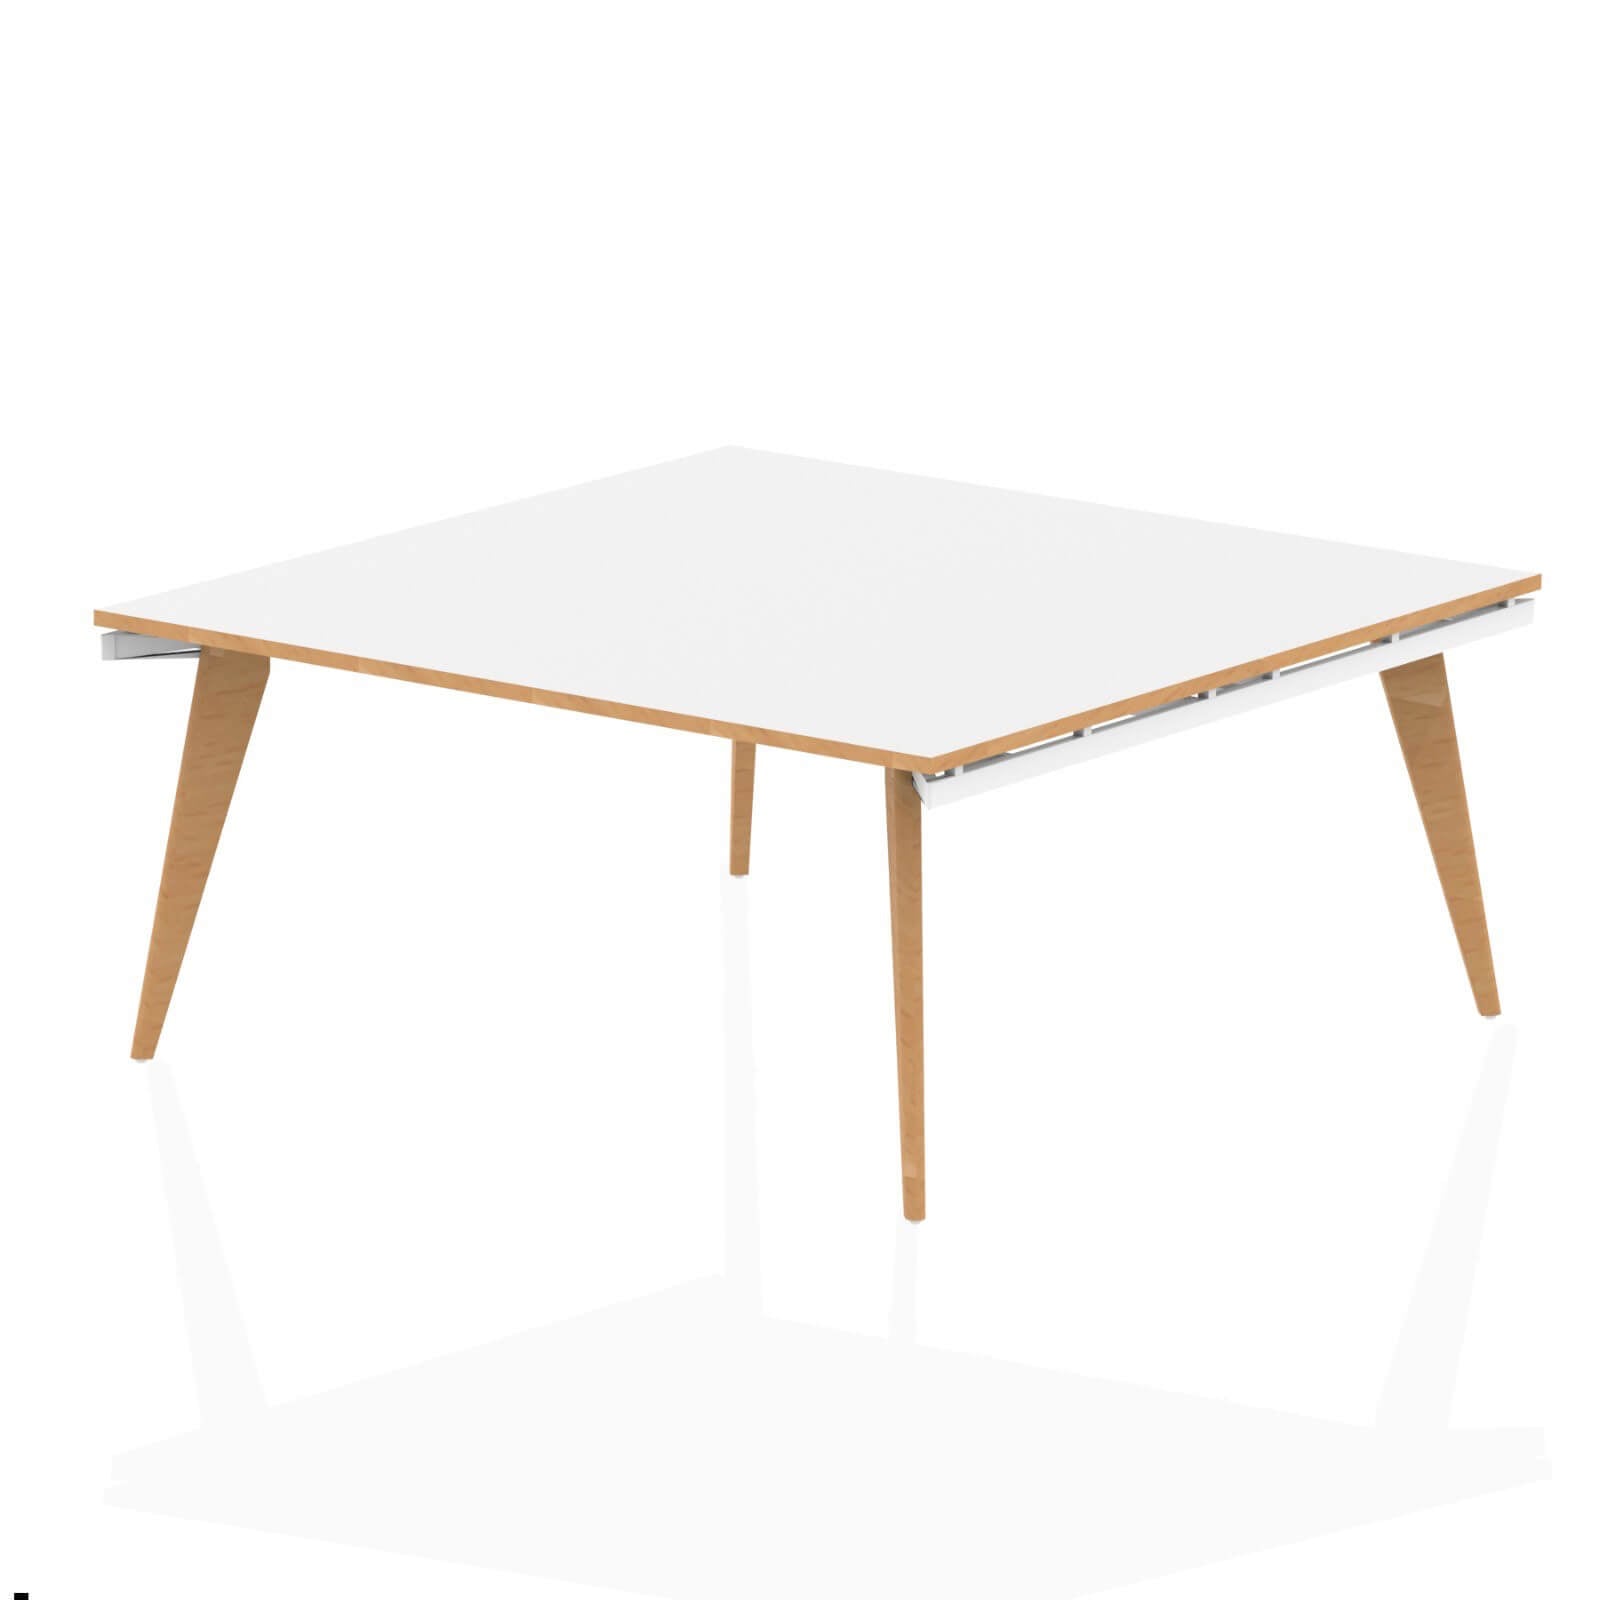 Oslo Square Boardroom Table - 1600x1600mm, White Frame, Wooden Legs, MFC Material, Self-Assembly, 5-Year Guarantee